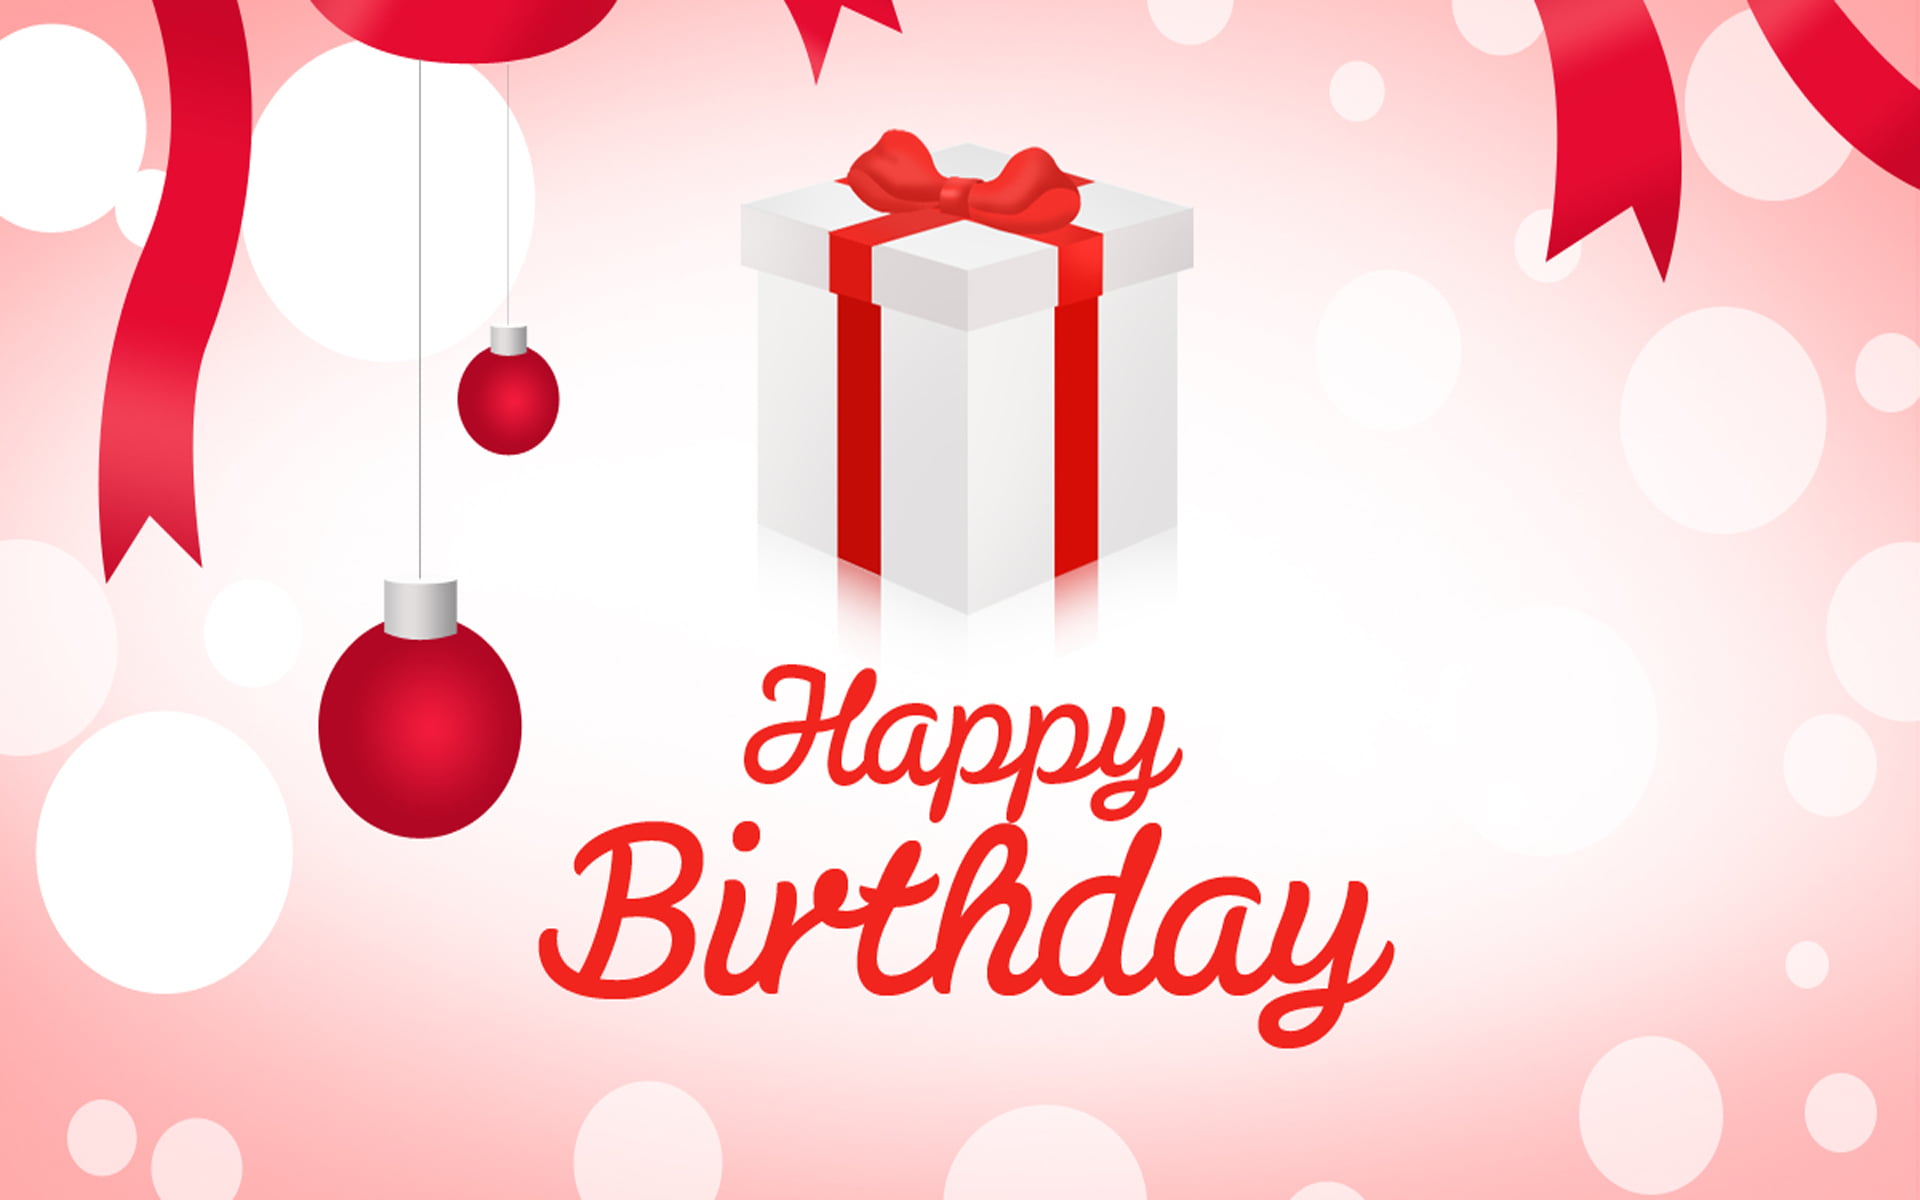 birthday images free download